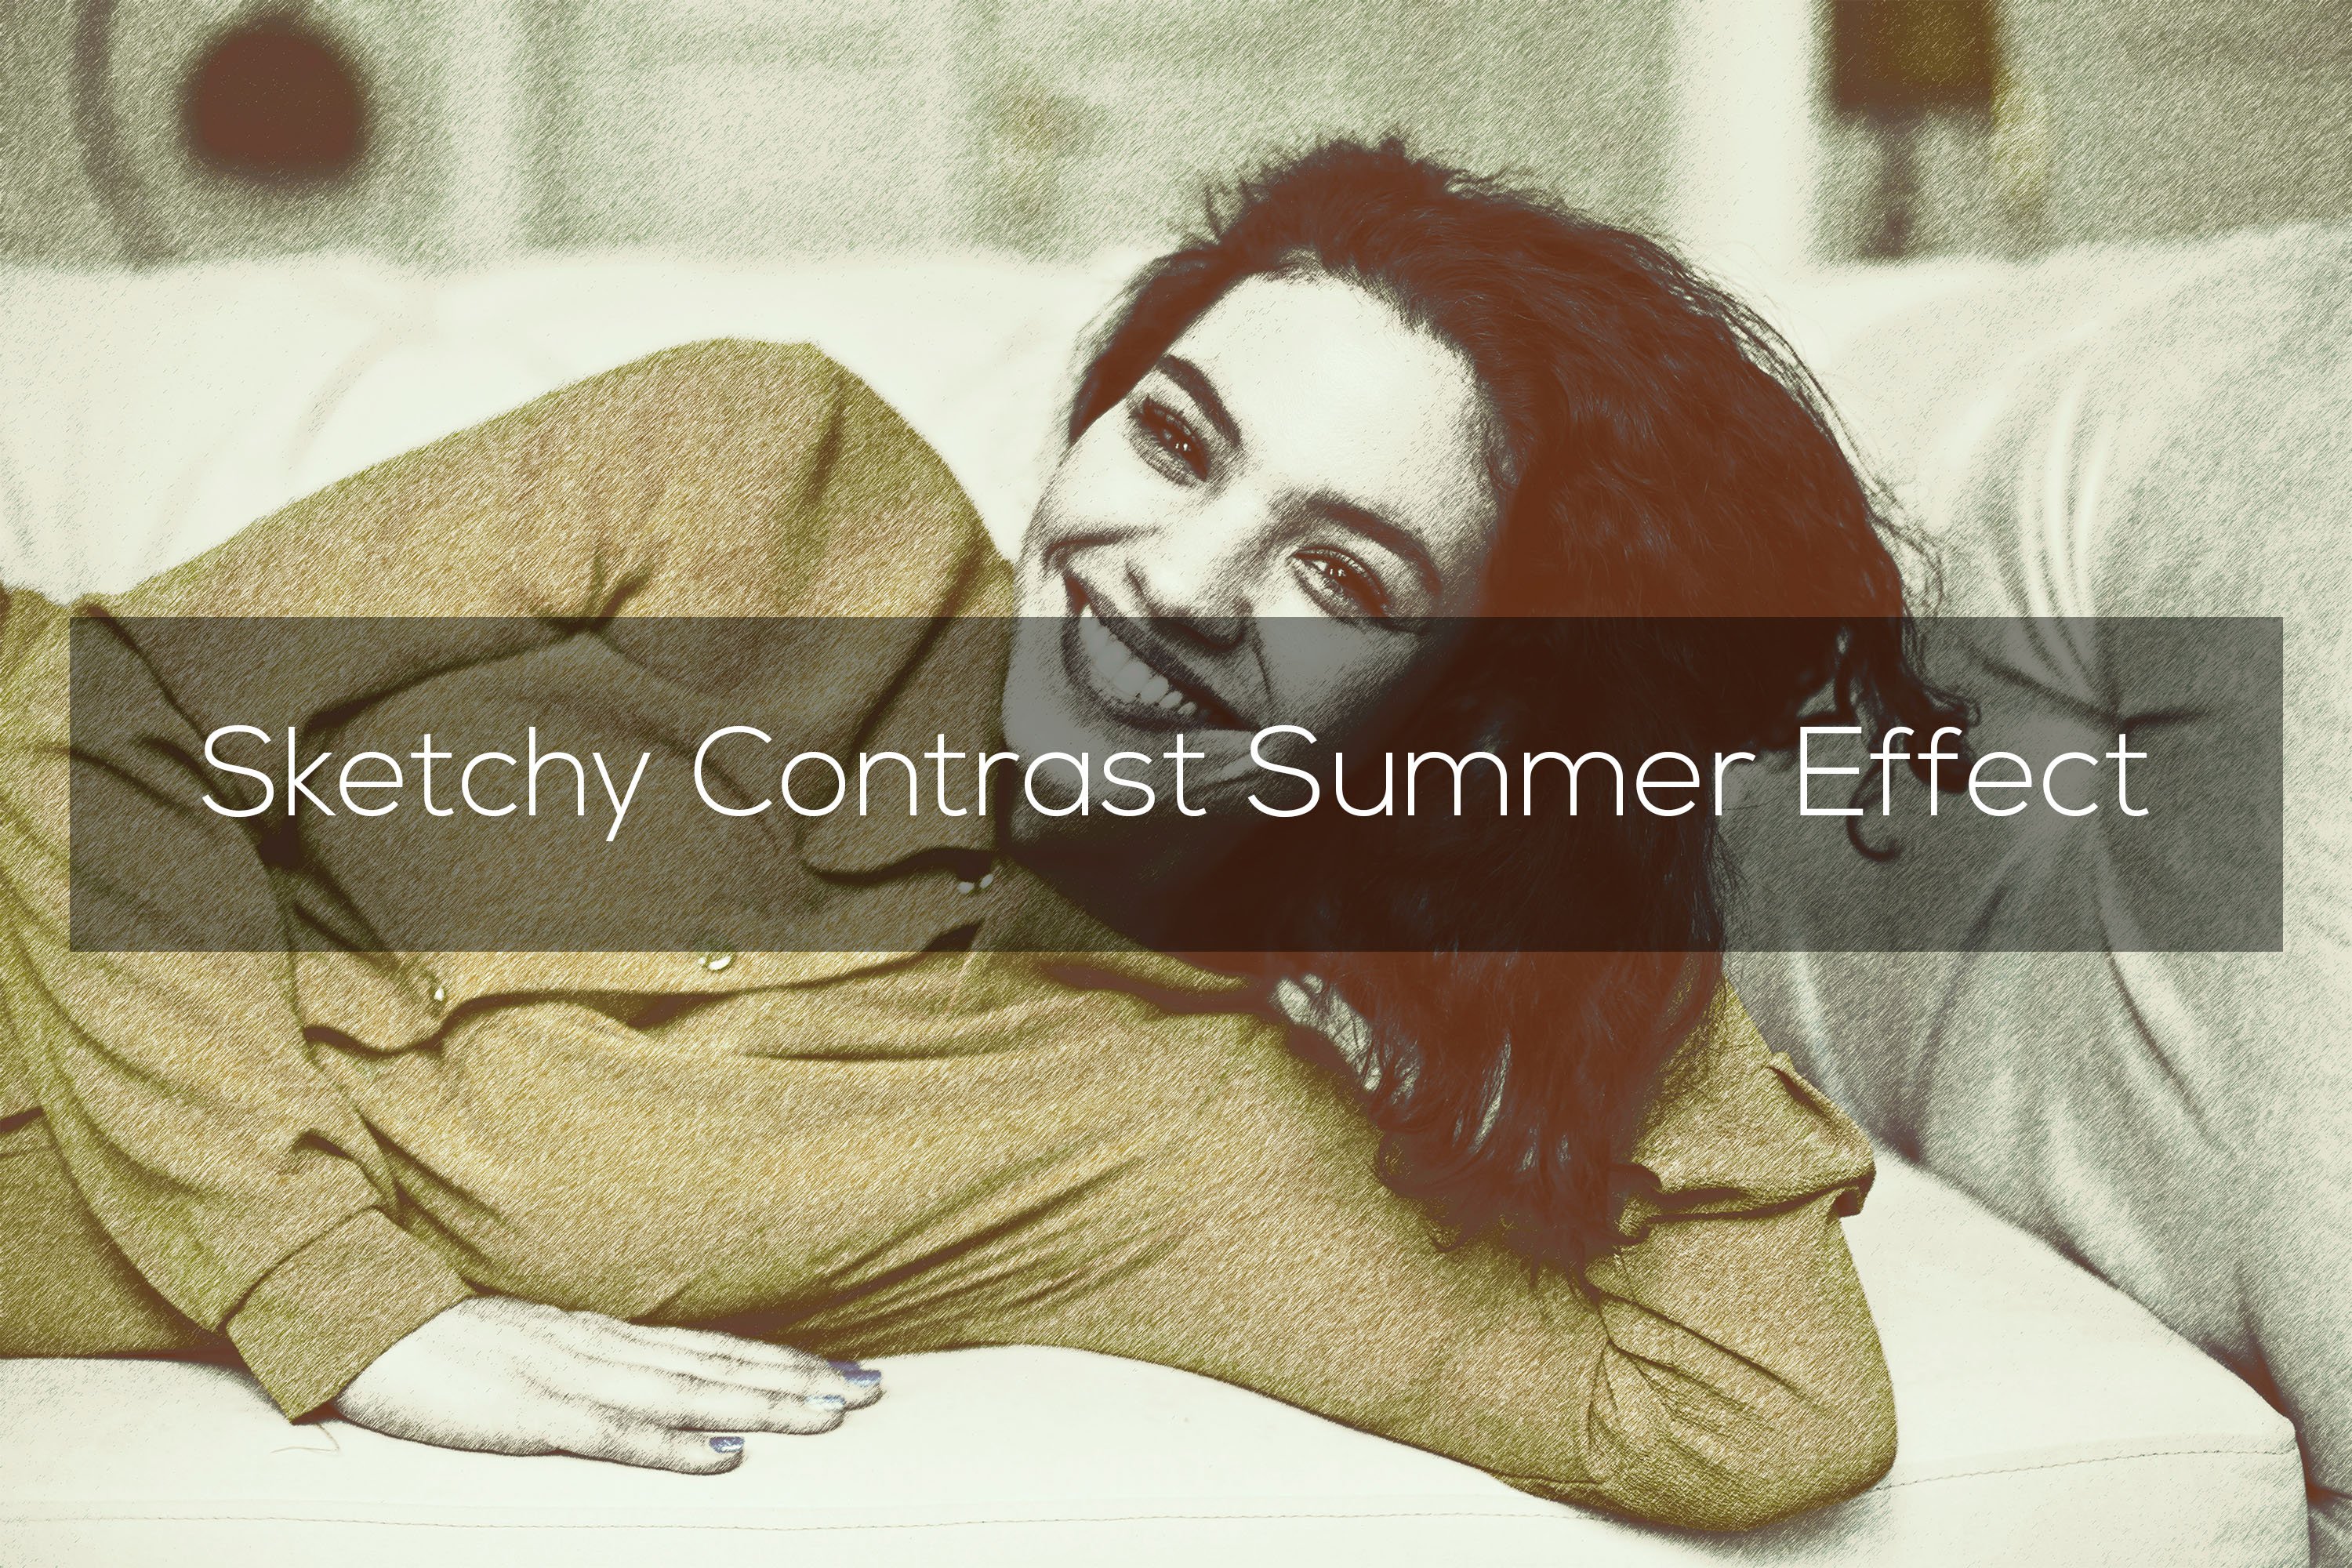 Sketchy Contrast Summer Effectcover image.